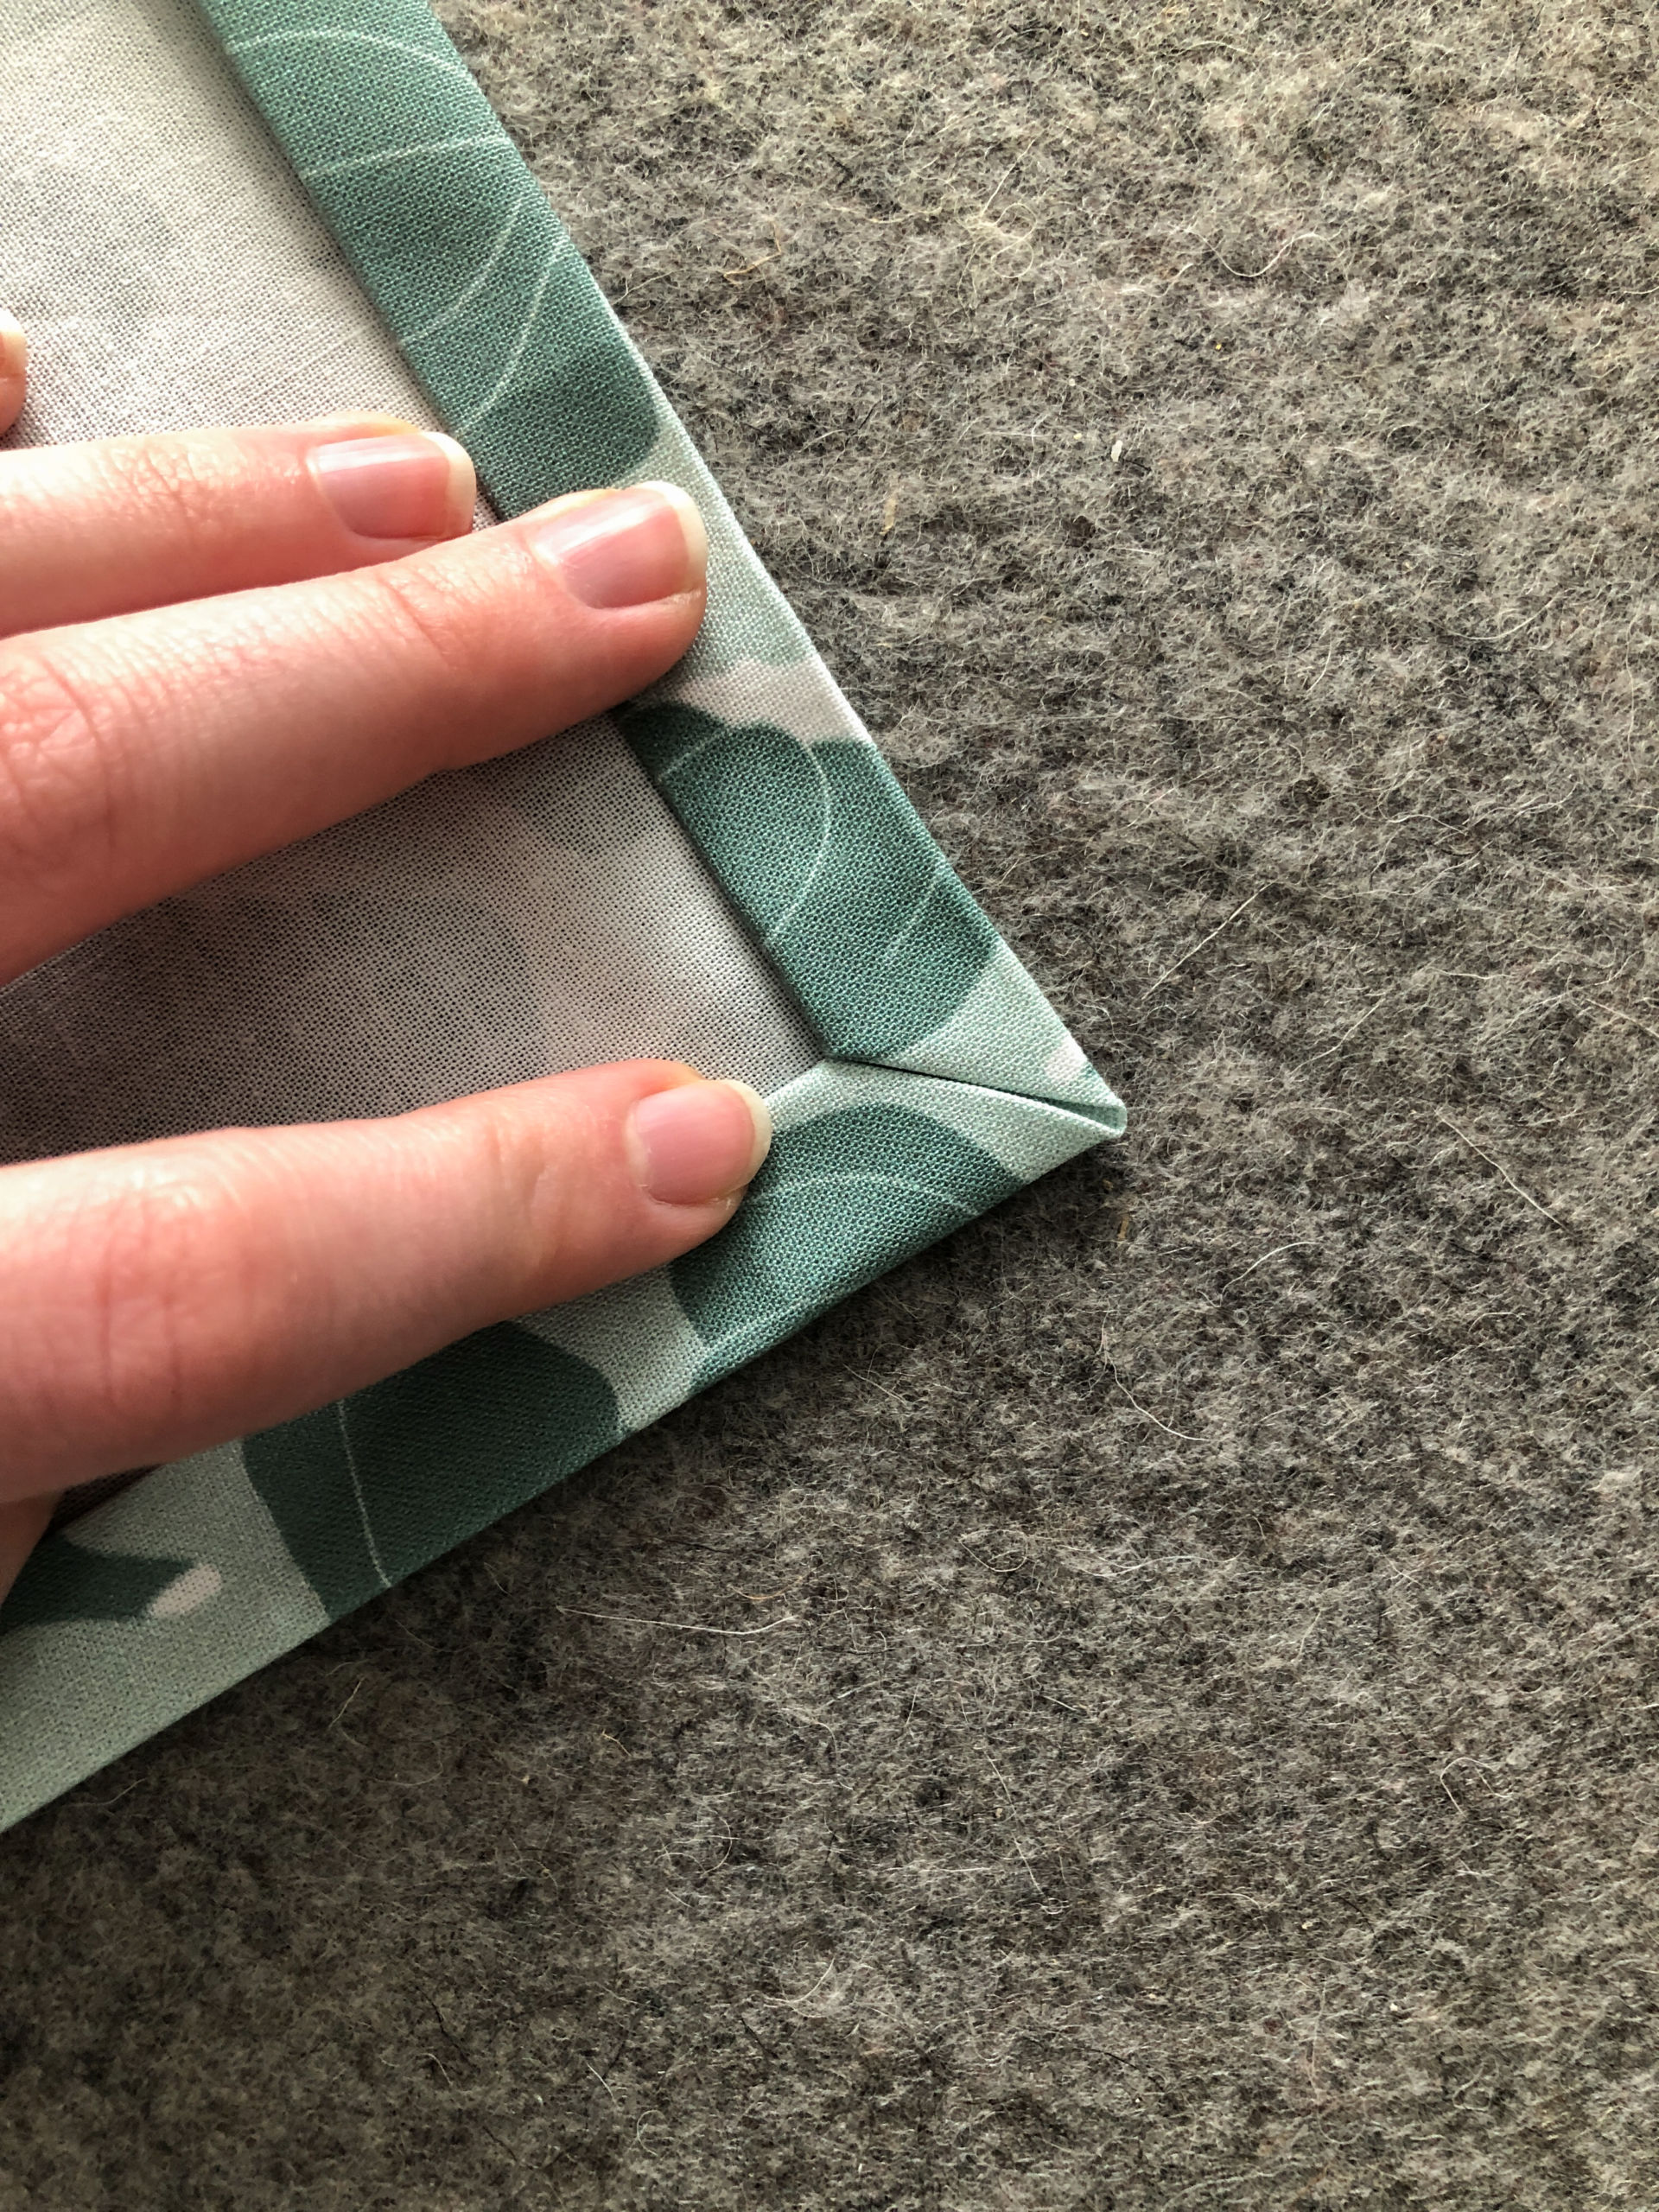 Add an easy homemade touch to your picnic or lunch with this DIY reusable sandwich wrap tutorial. This step by step photo tutorial shows you how to sew your own reusable sandwich wrap out of fabric that can be washed and used every day. suzyquilts.com #quilting #sewingdiy